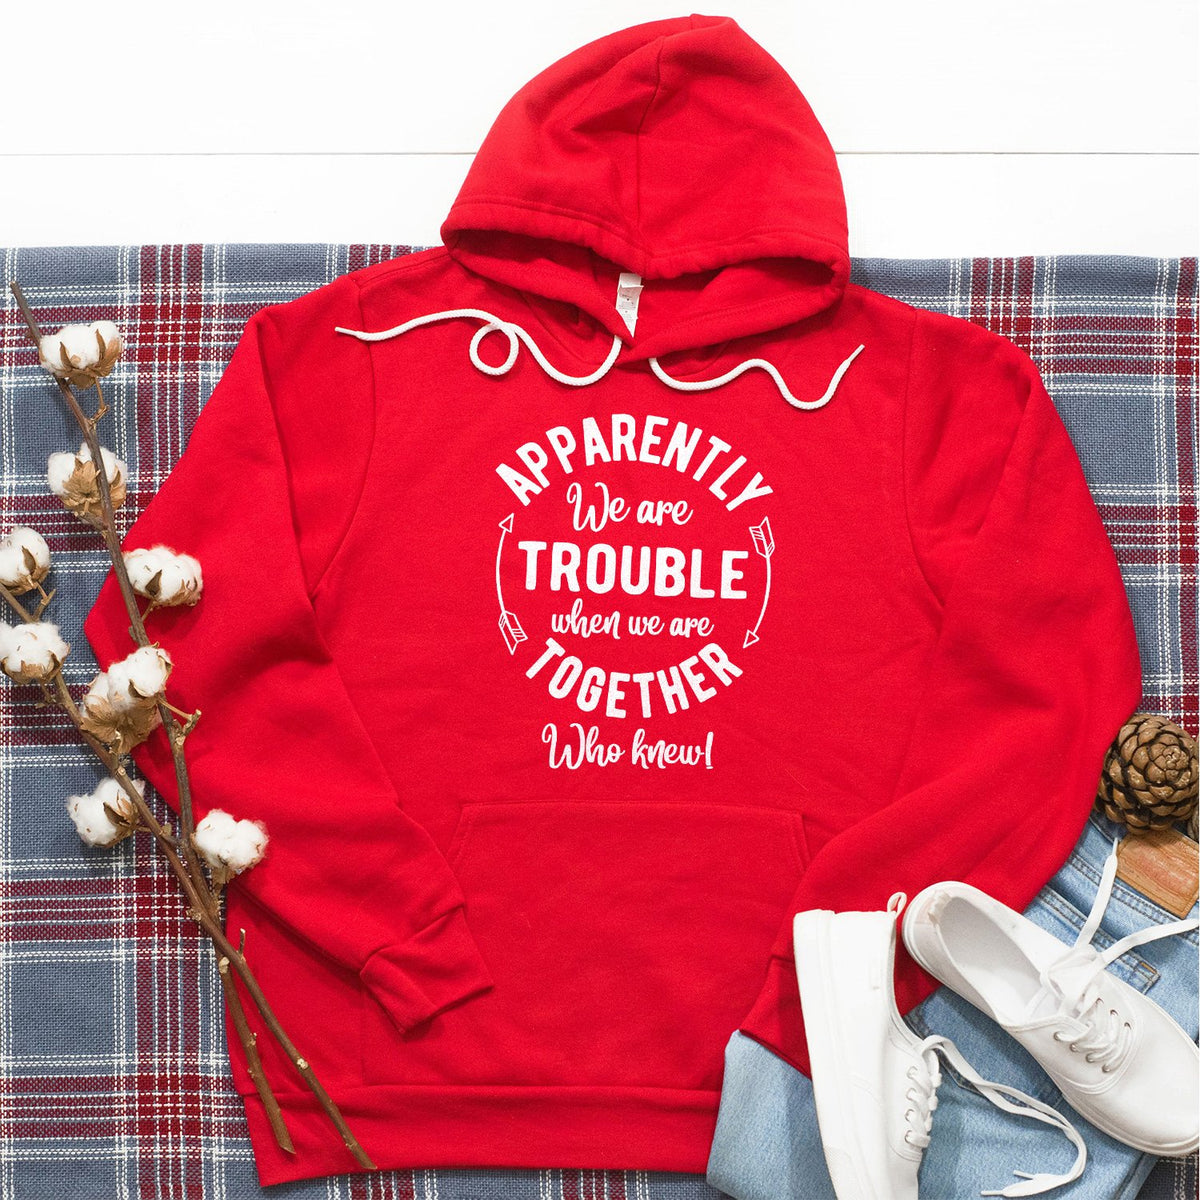 Apparently We Are Trouble When We Are Together - Hoodie Sweatshirt